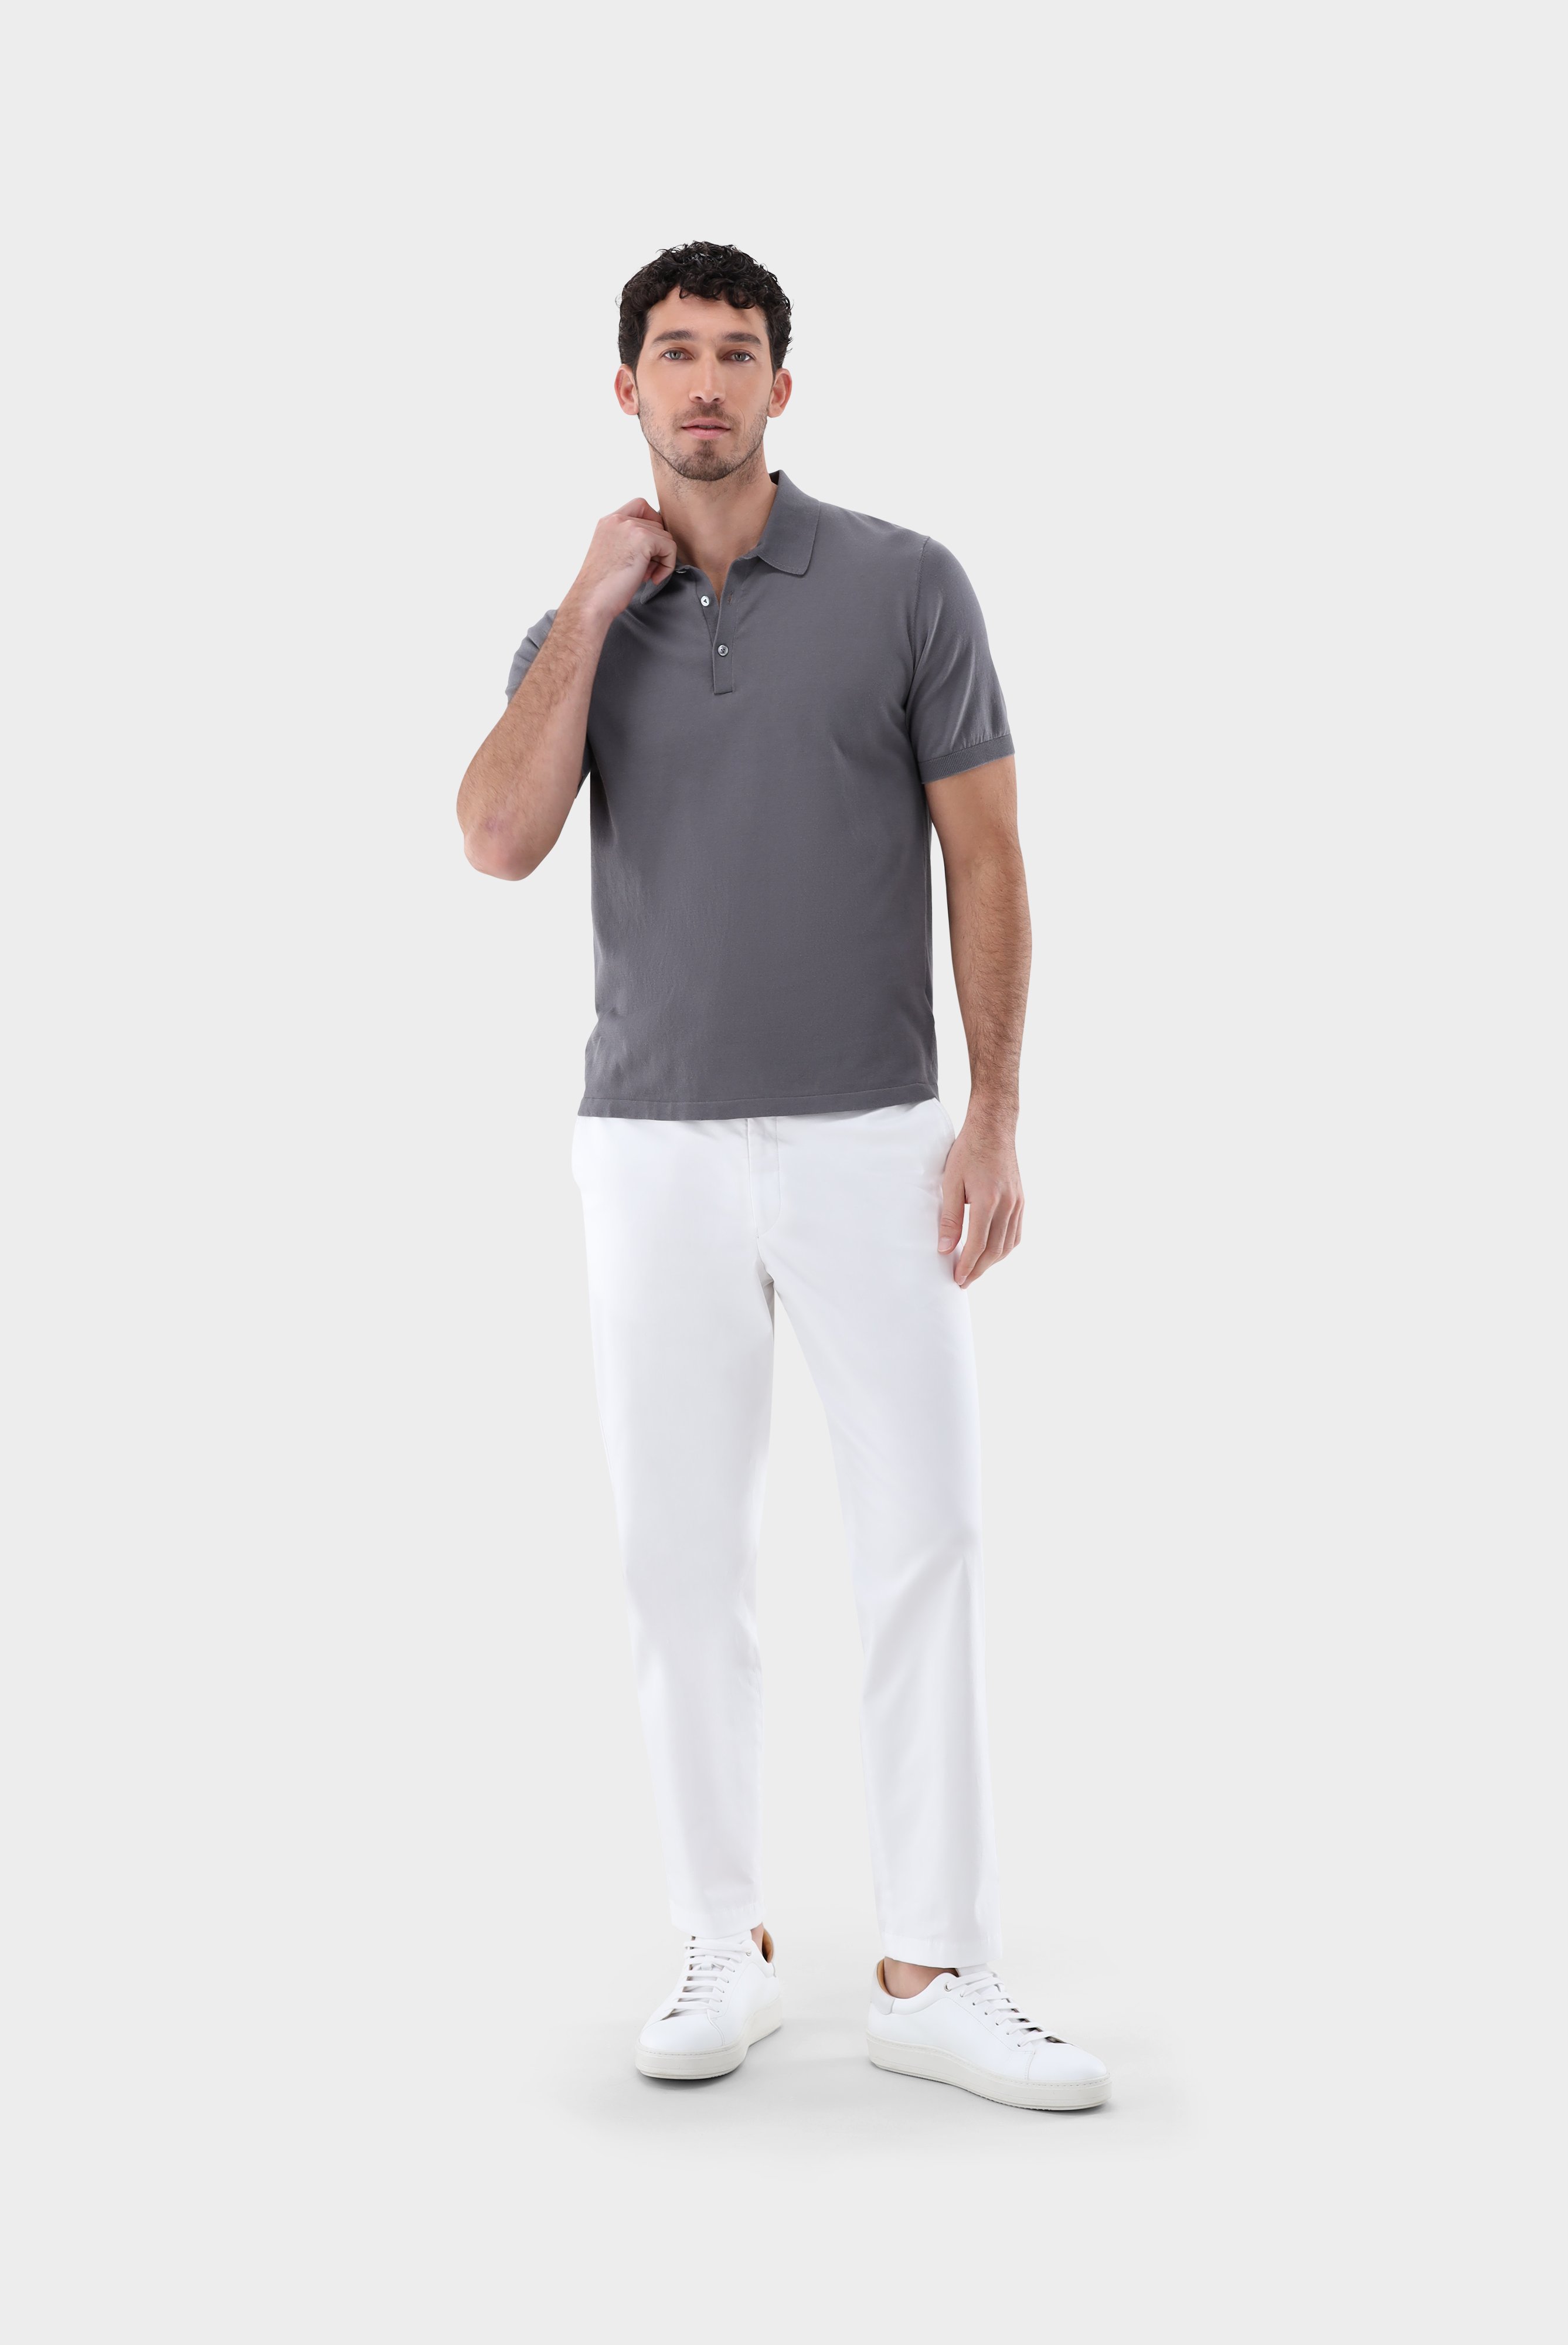 Poloshirts+Knit Polo made of Air Cotton+82.8510..S00174.070.S